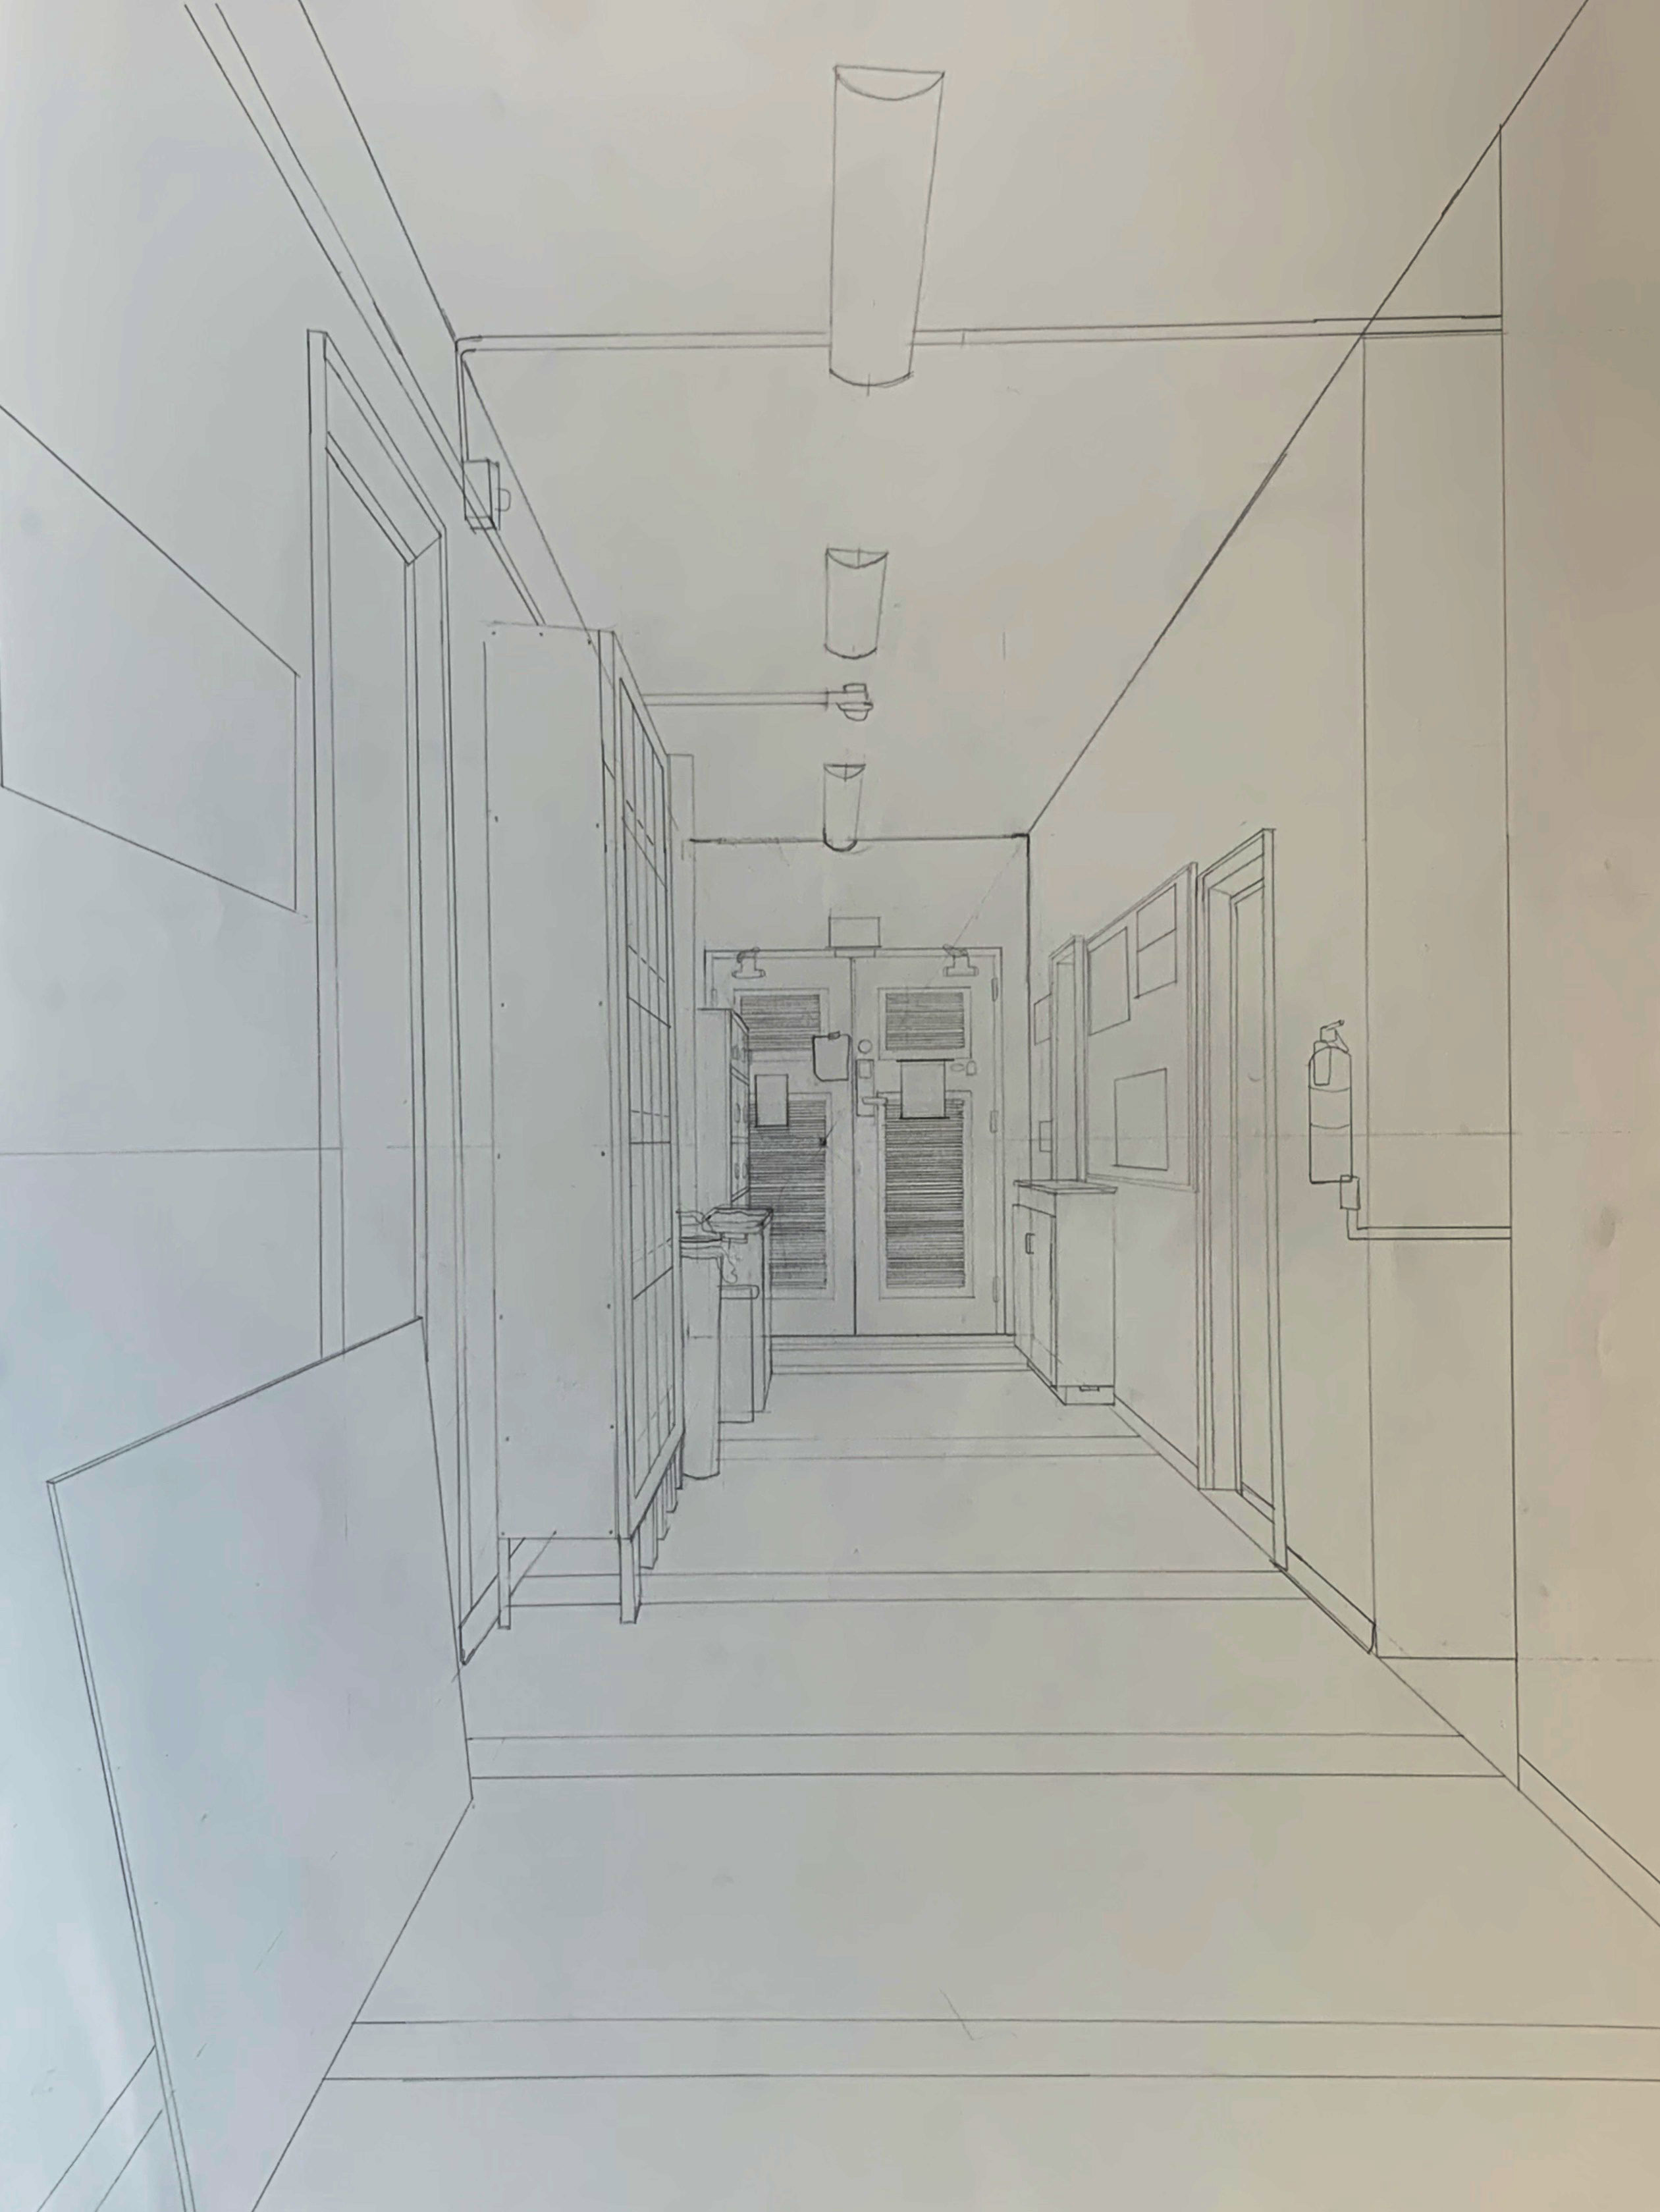 A linear perspective drawing of the second floor of Briscoe Hall.